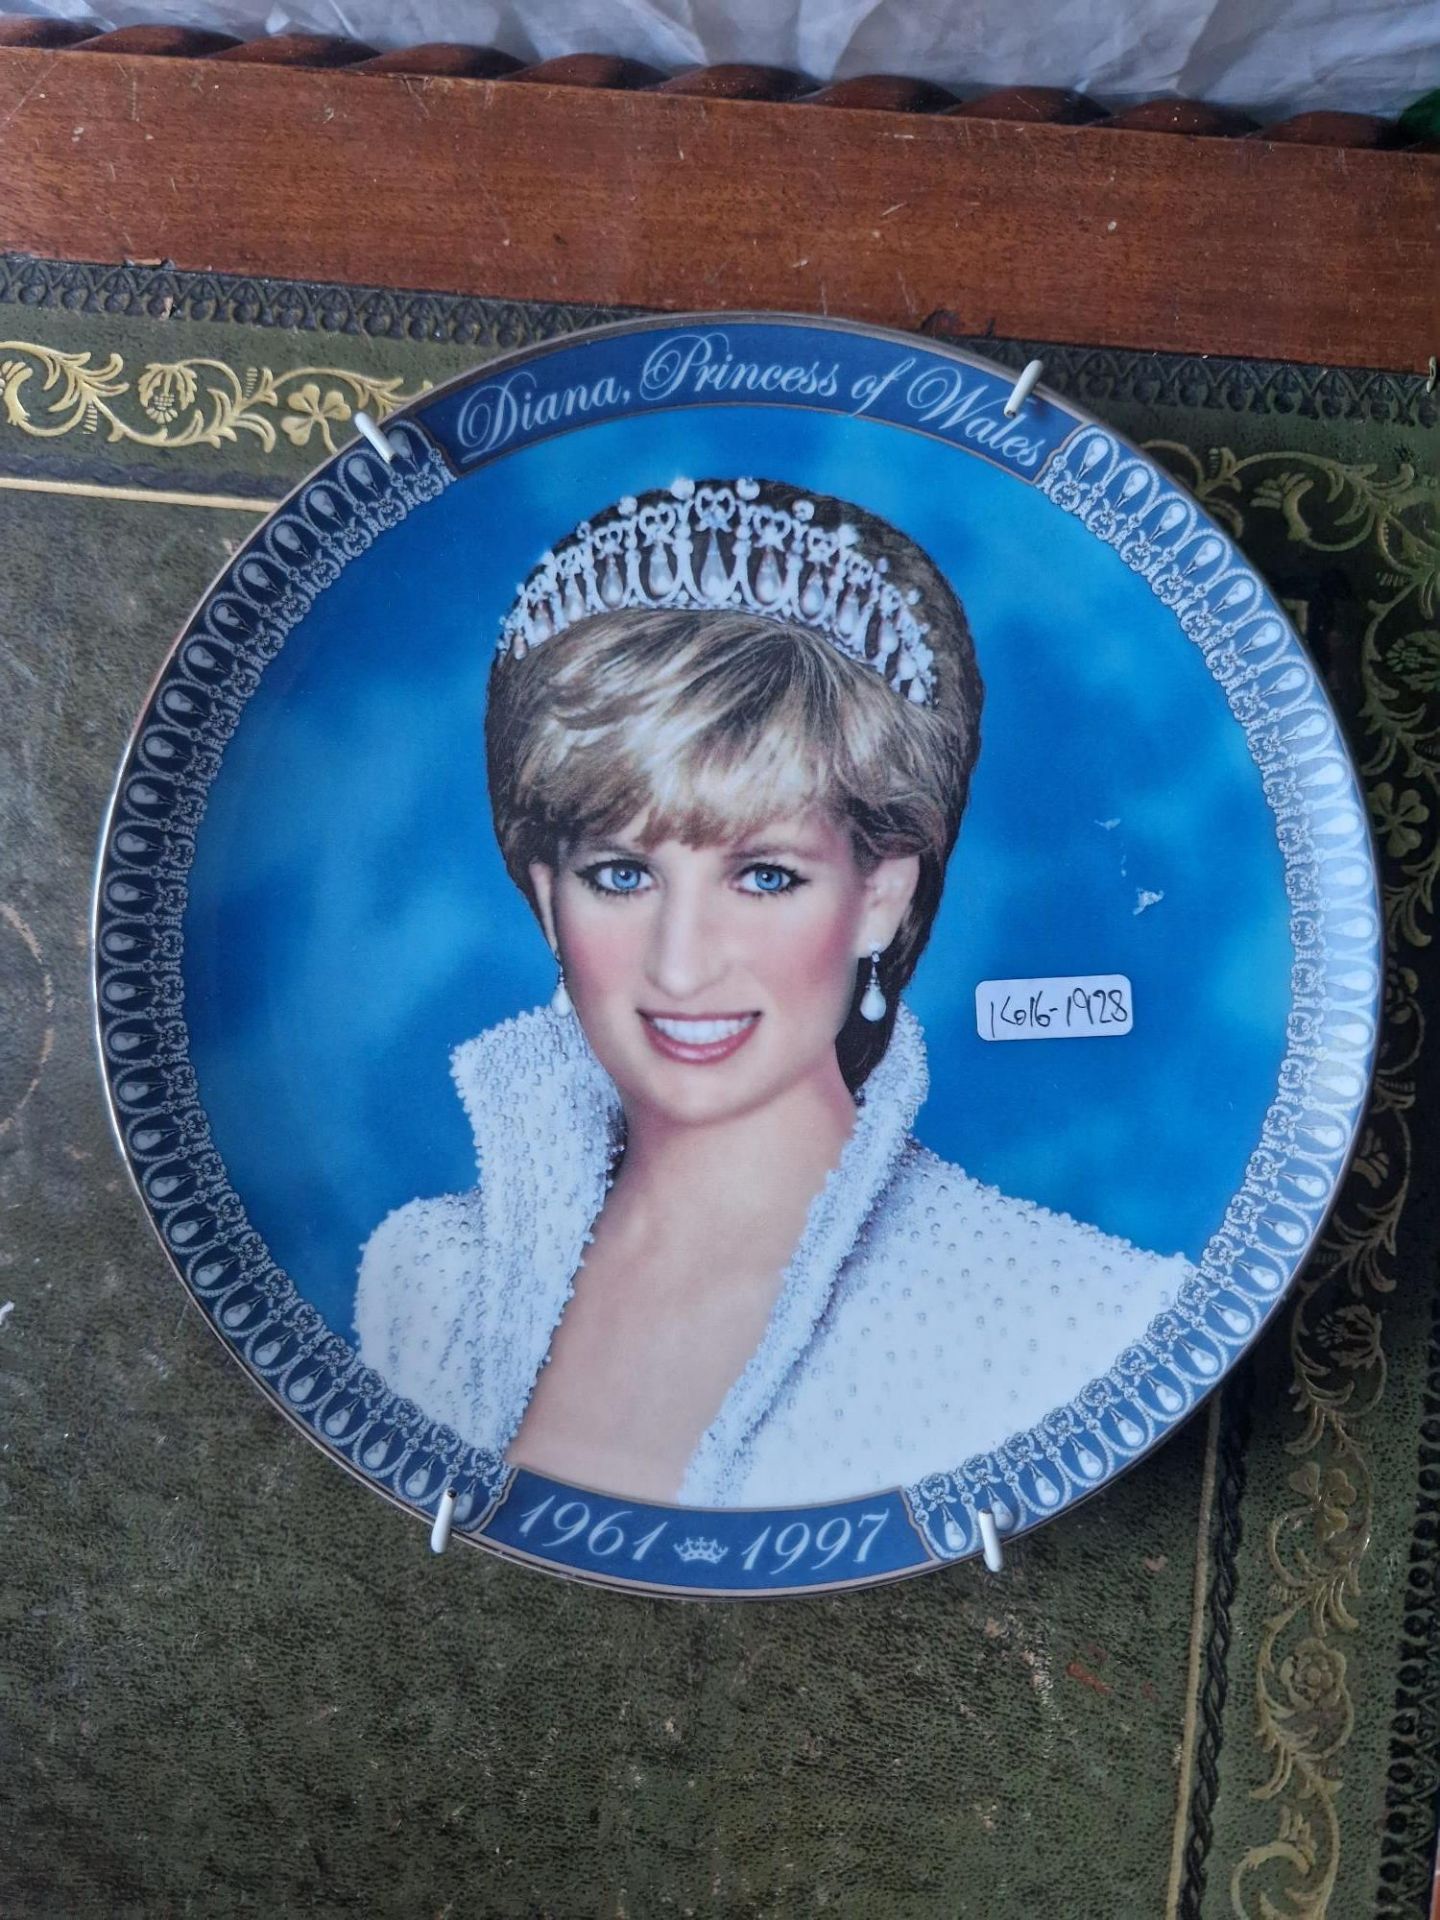 A tribute to prince diana from the franklin mint Plate